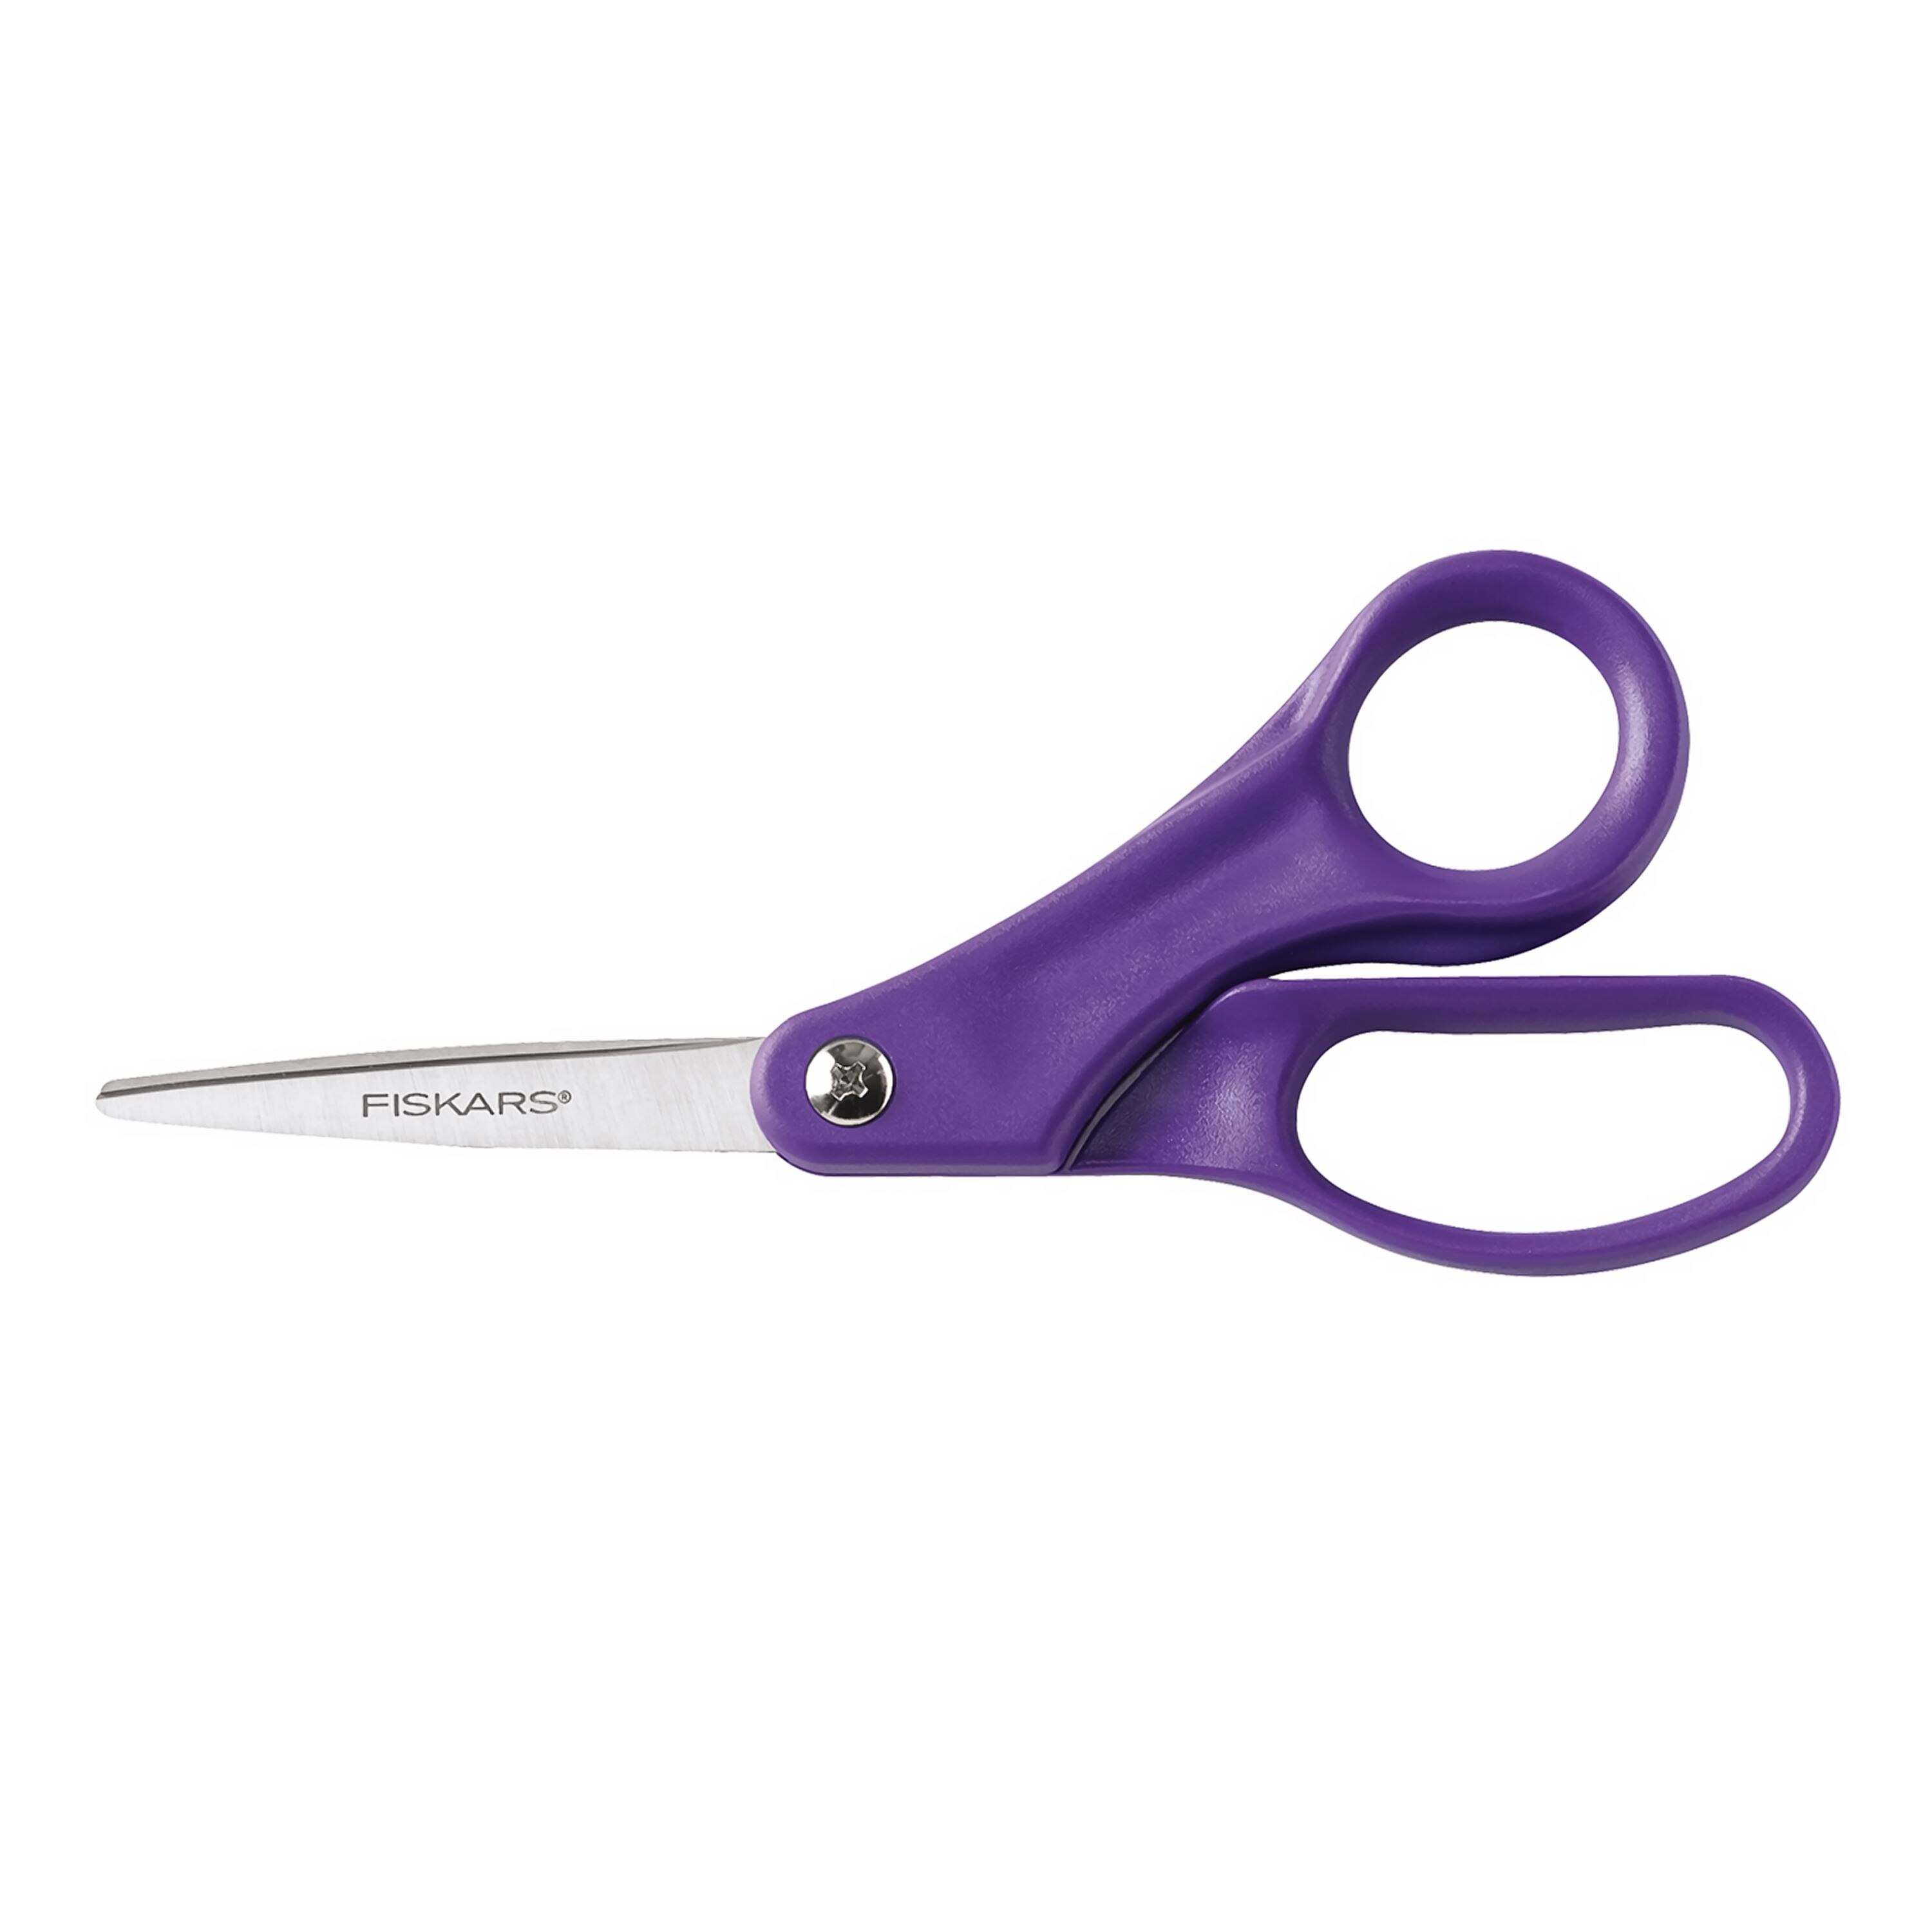 Fiskars Smaller Handle for Beginners Sewing Scissors, 7-Inches (03-049178)